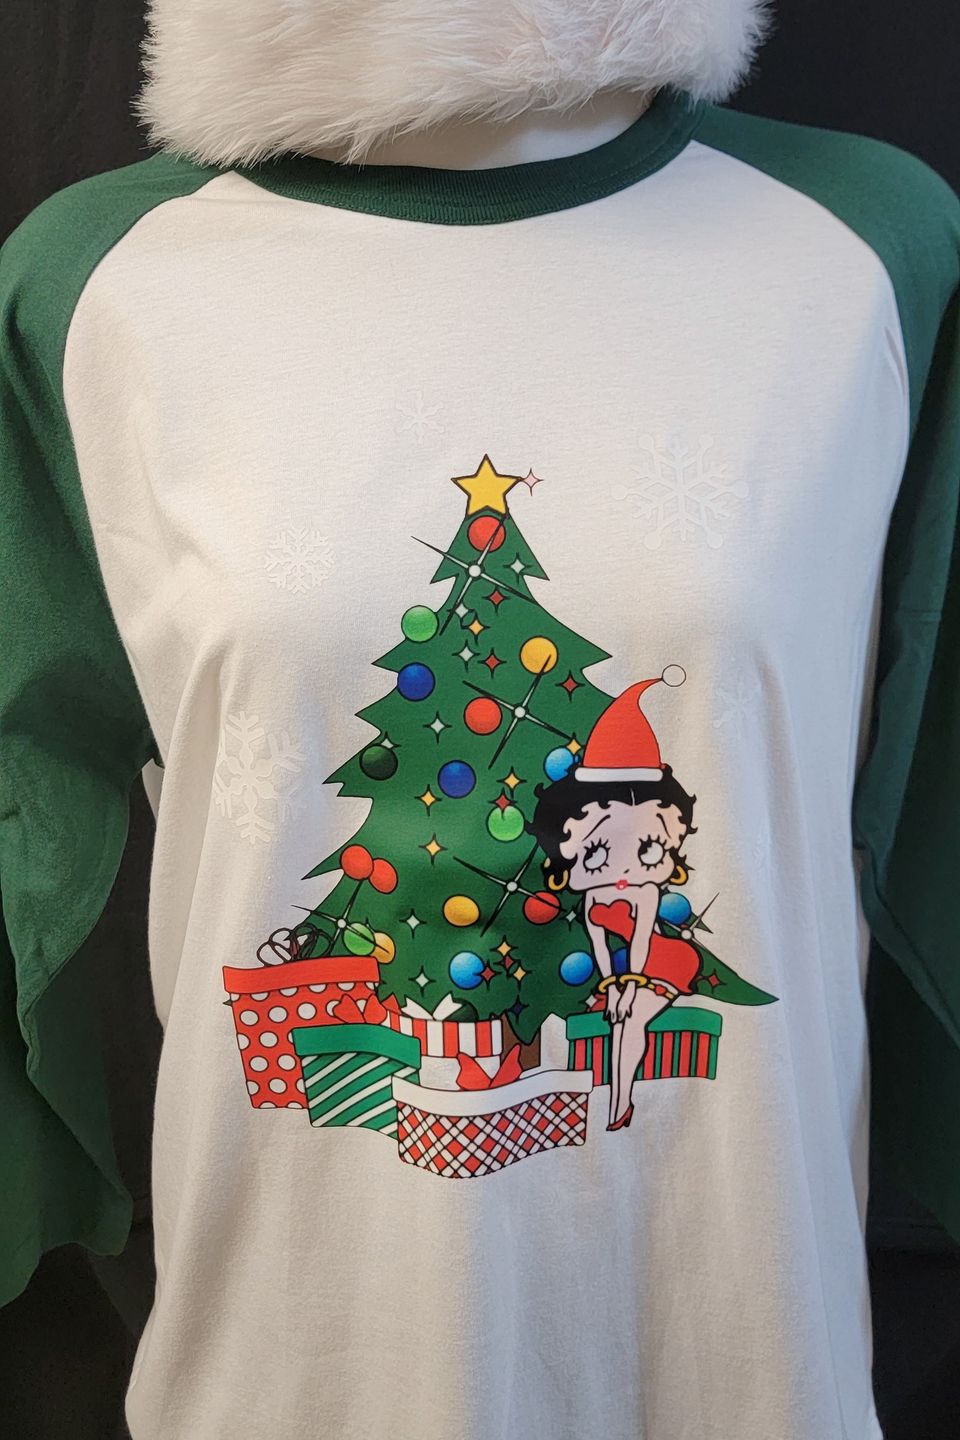 Example of a Betty Boop Christmas t-shirt using direct-to-film transfer (DTF) from SaRi's Creations.